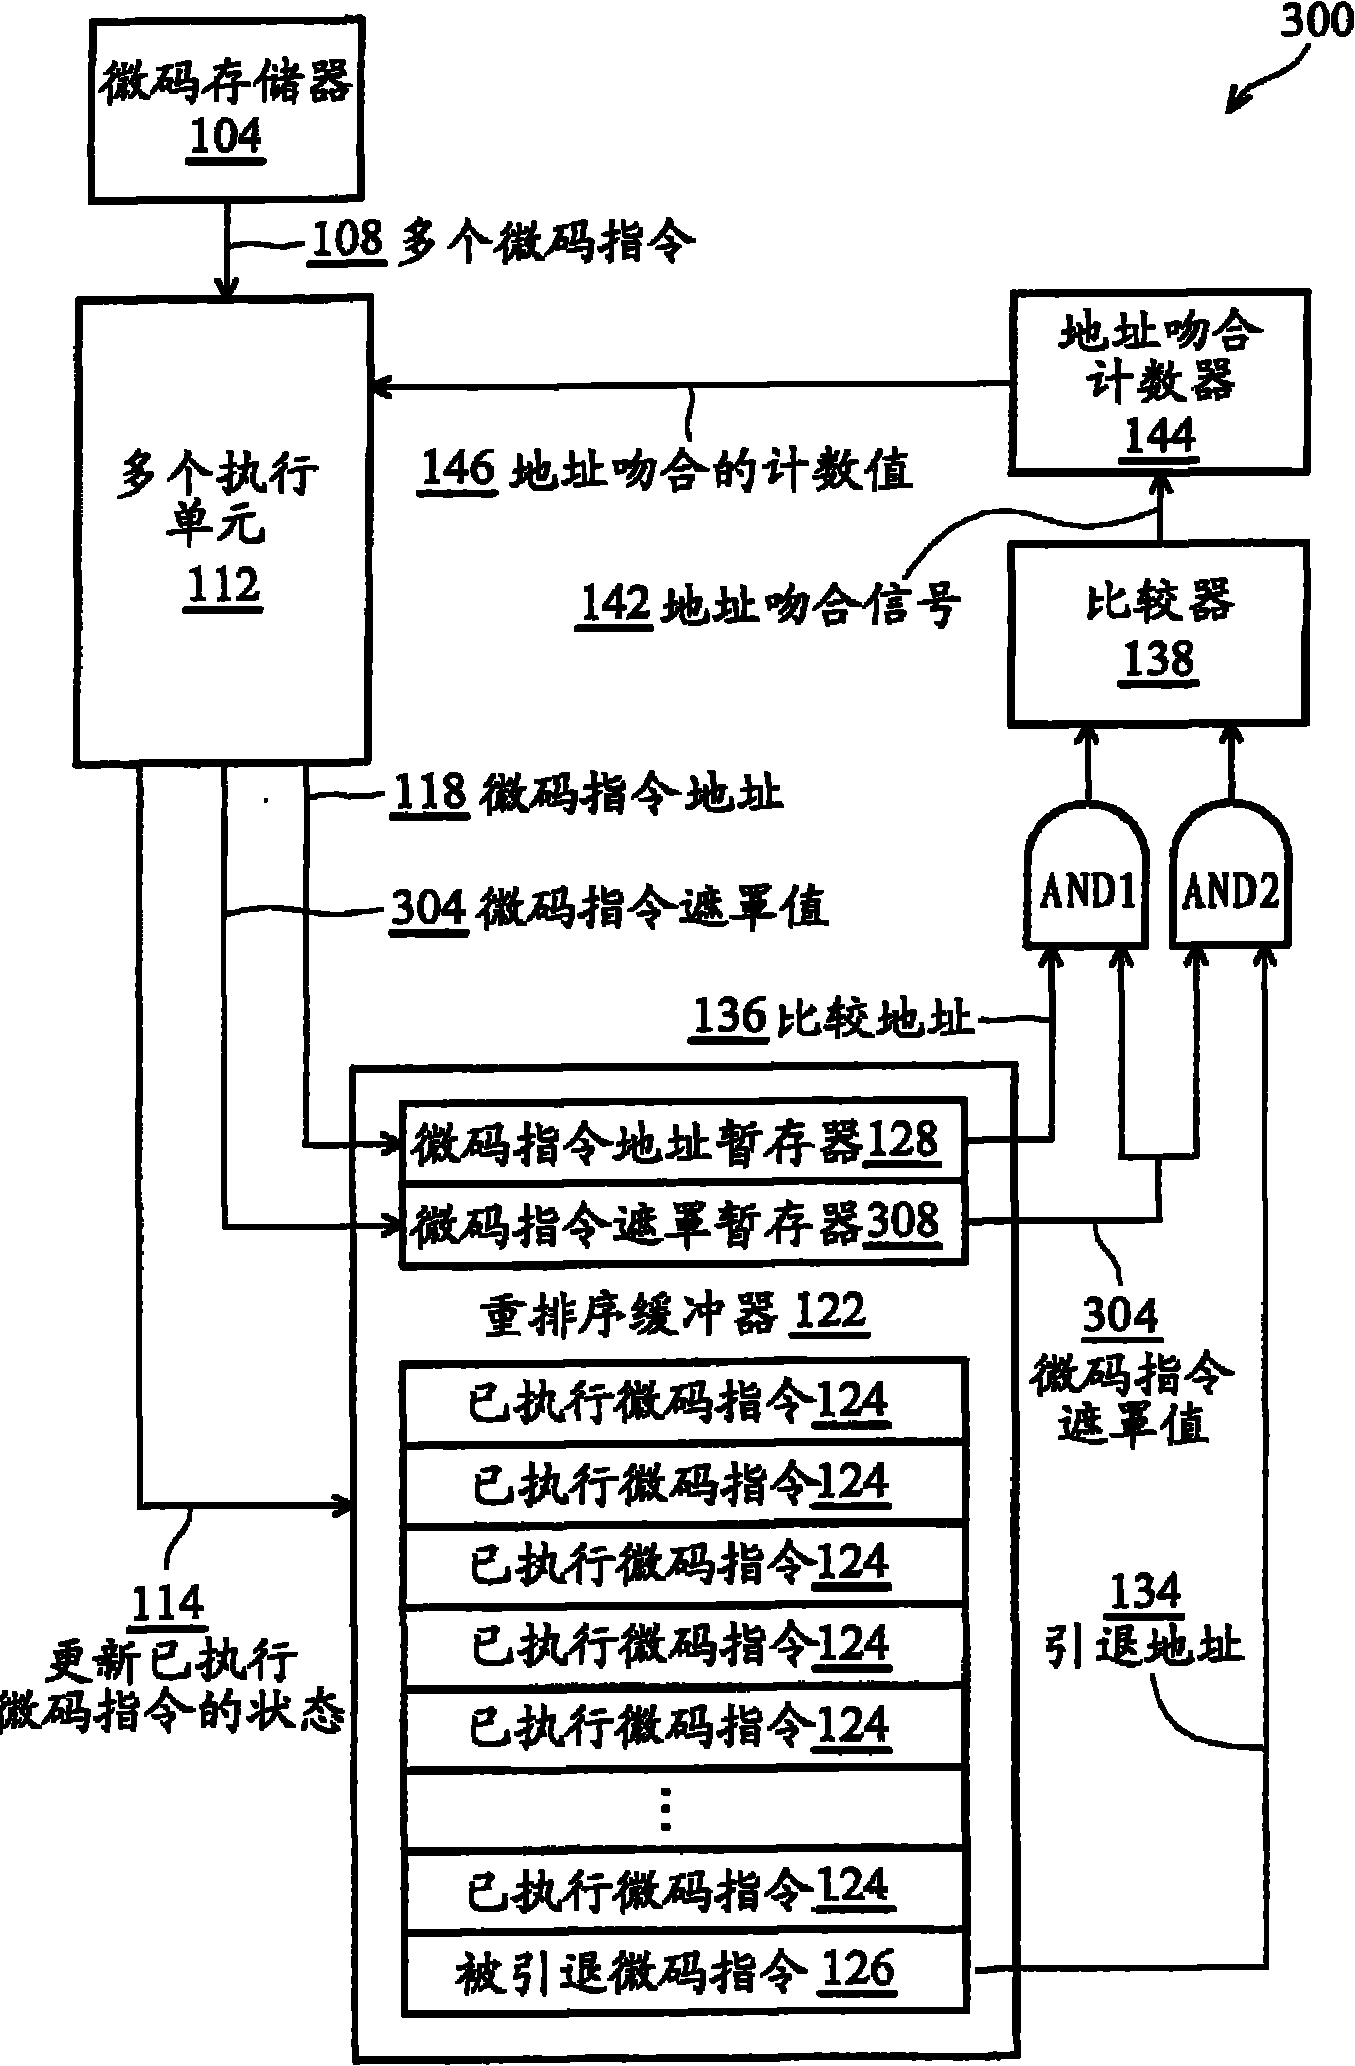 Performance counter for microcode instruction execution and counting method